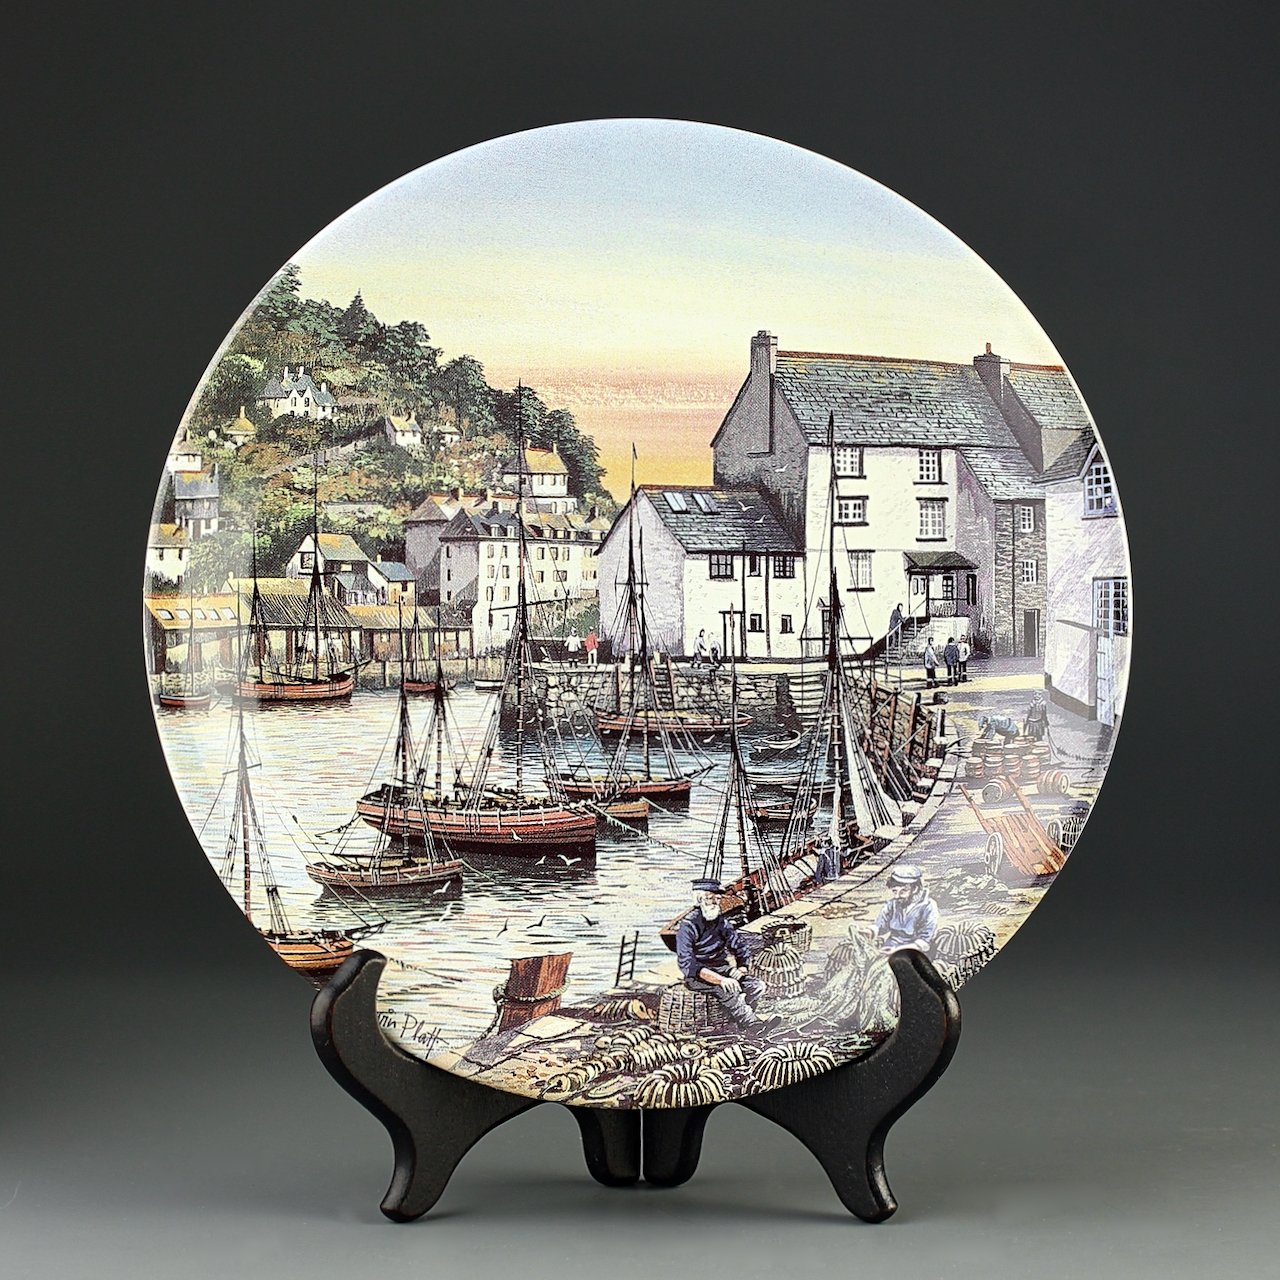 Is poole pottery closing down?